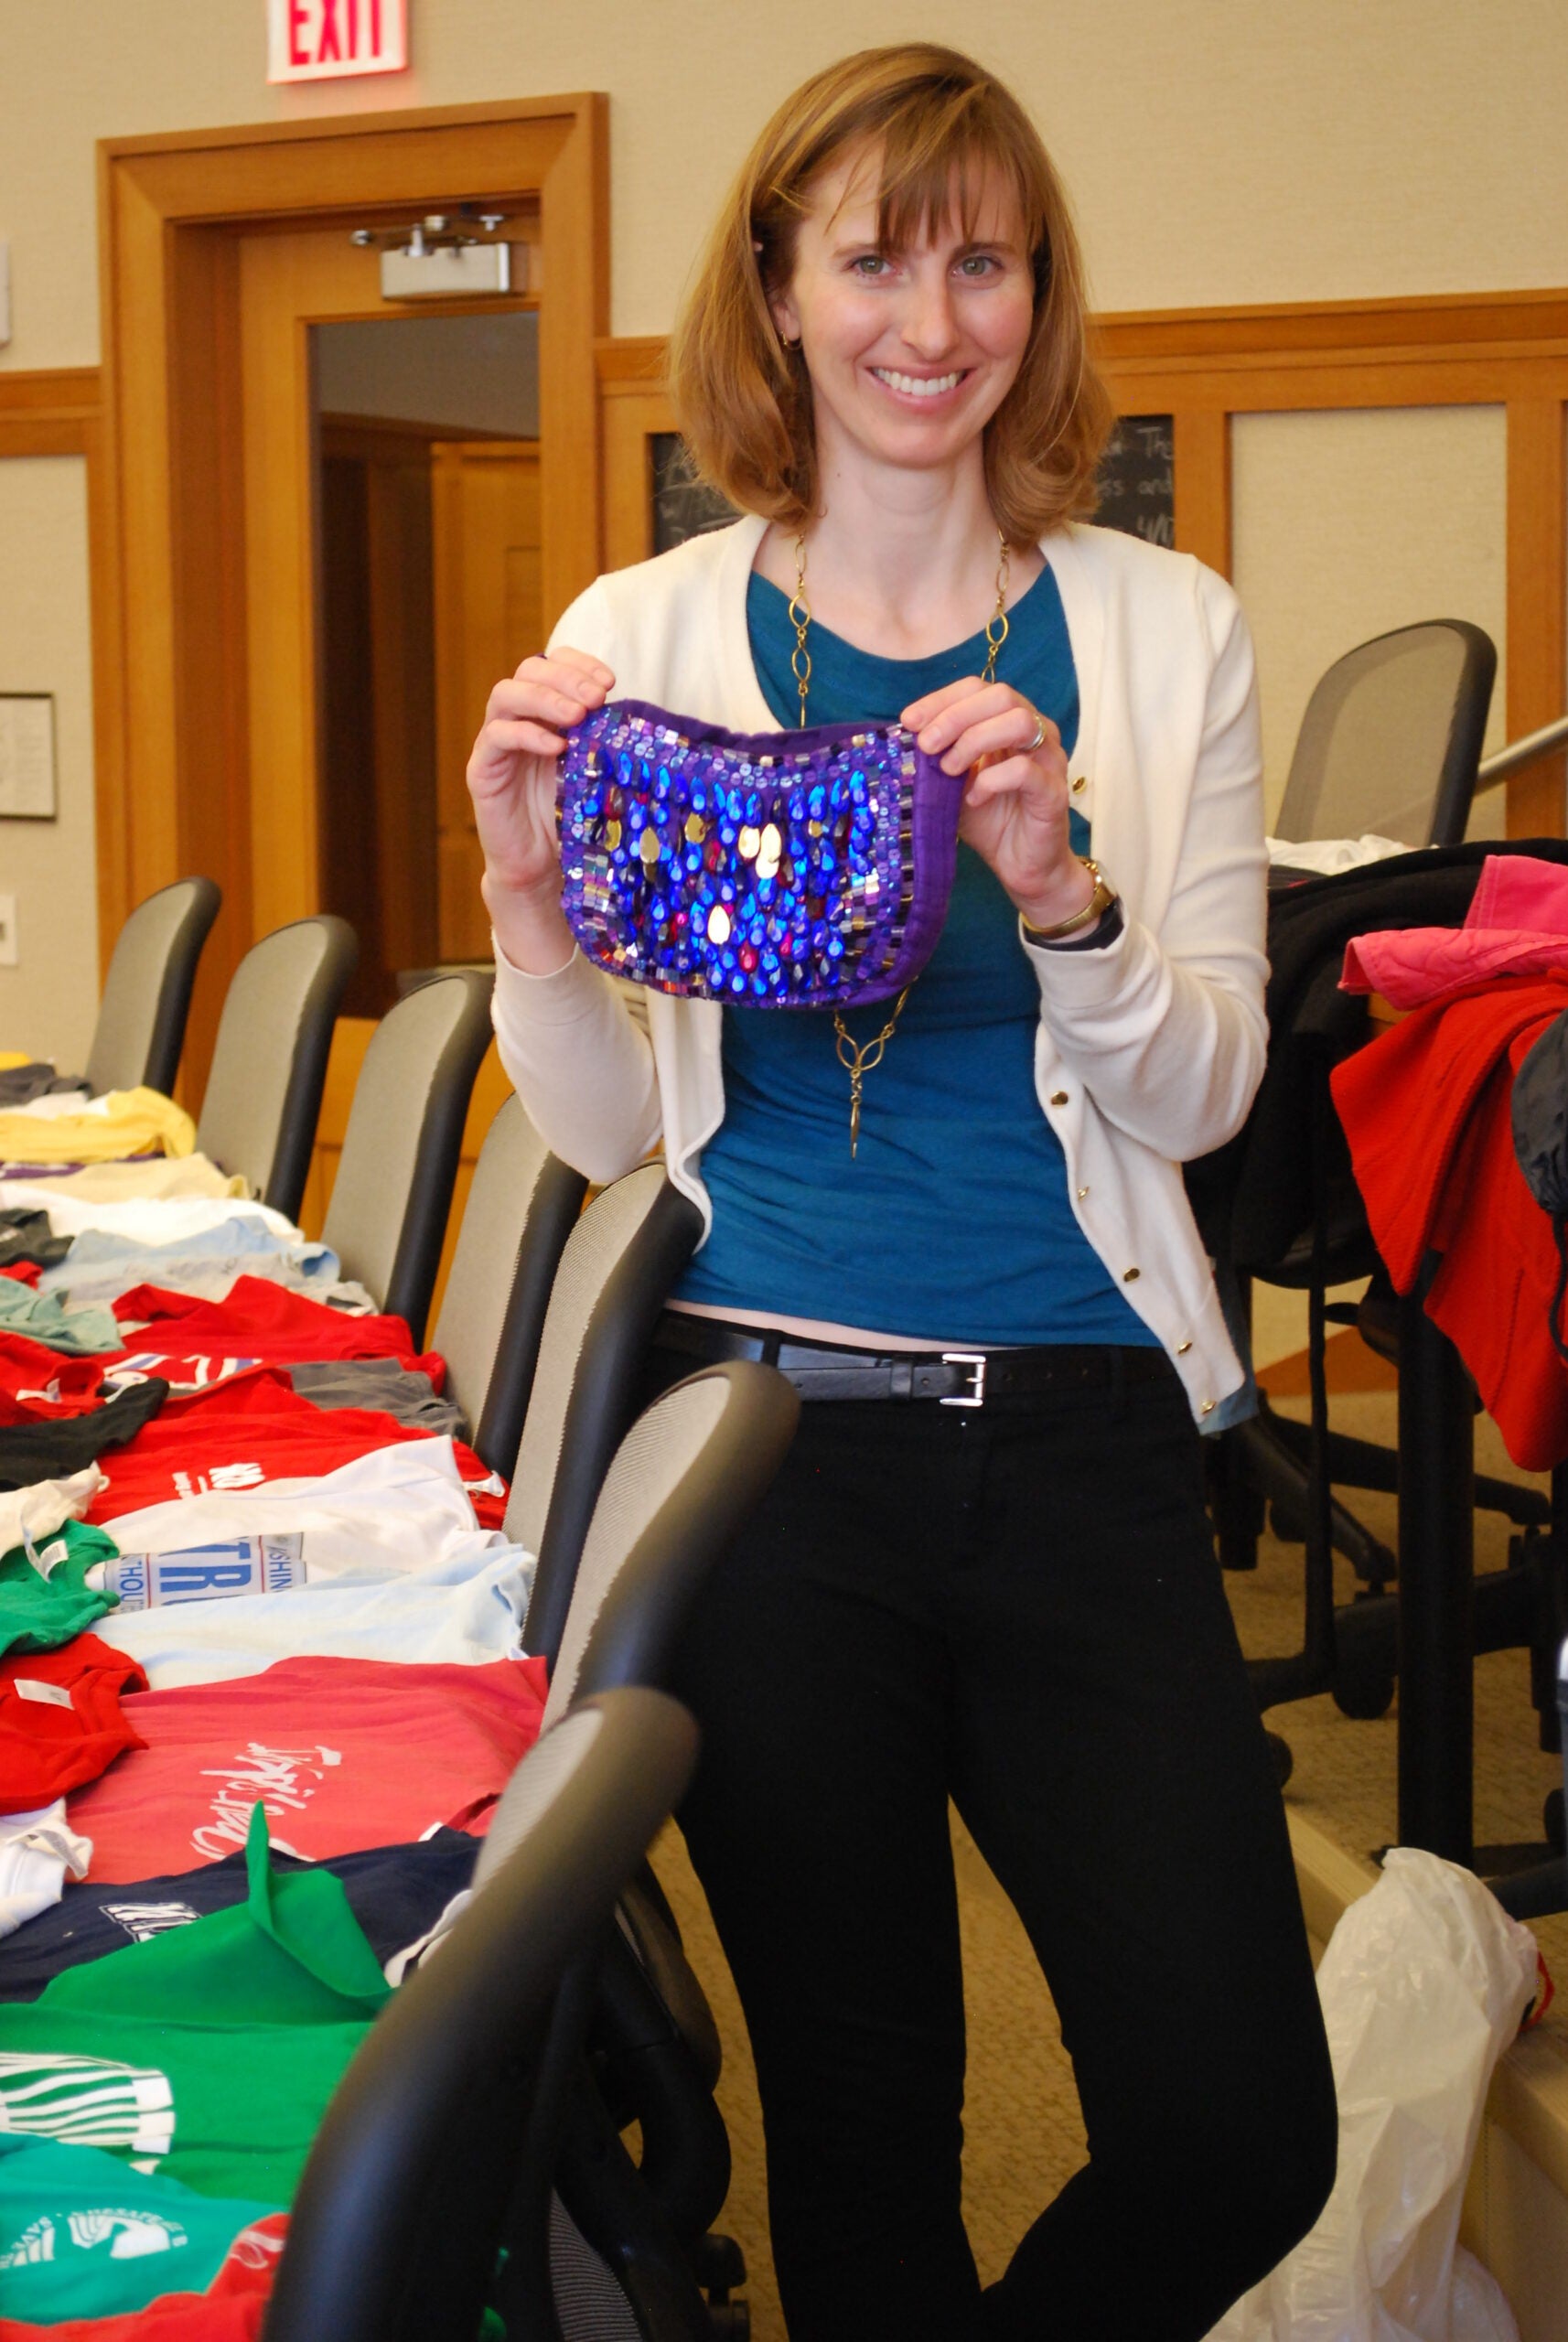 Anne Sargent holding up a sparkly purple purse